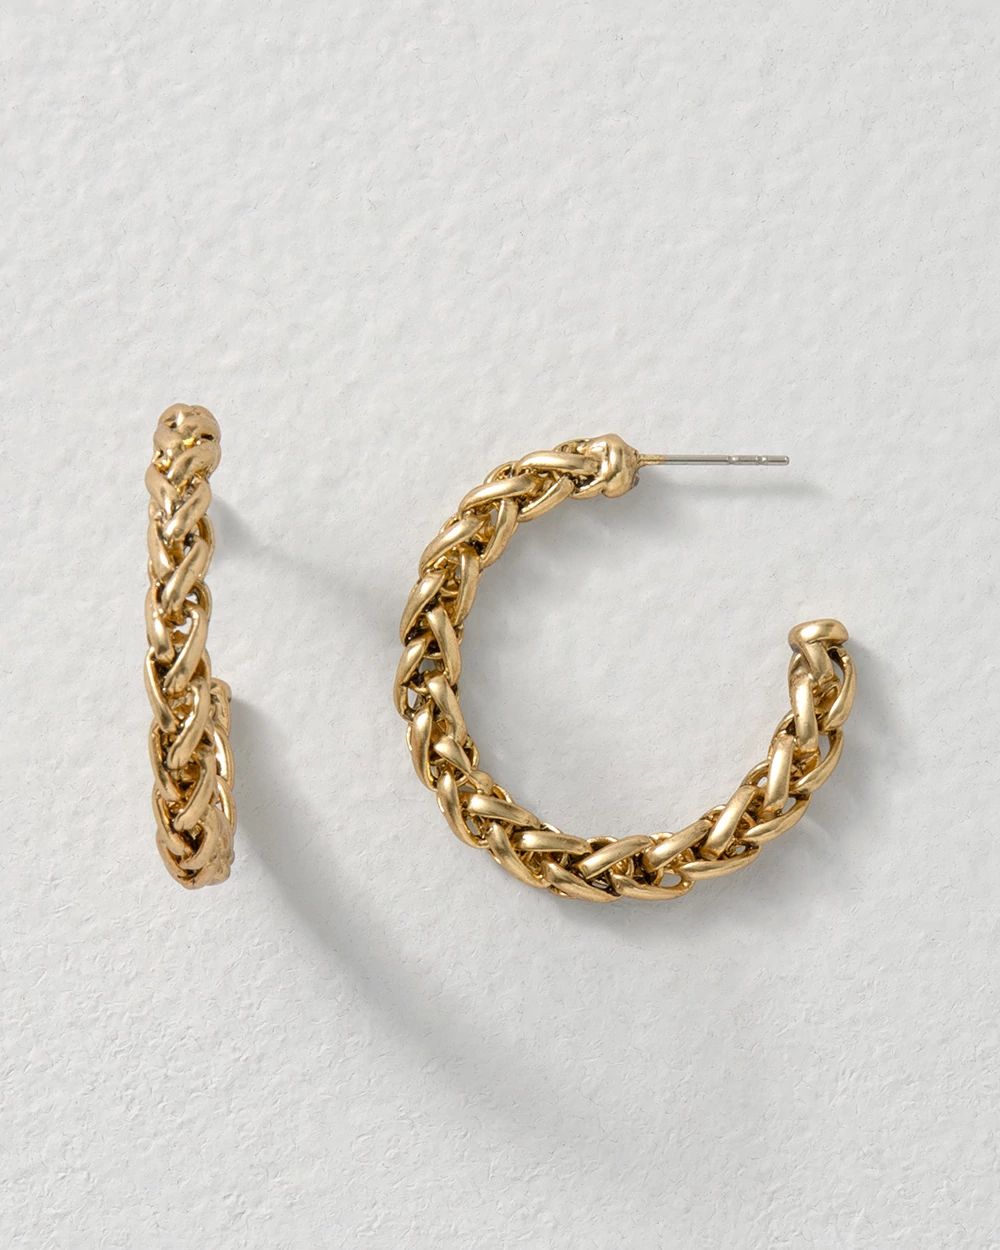 Goldtone Chain Hoop Earrings click to view larger image.